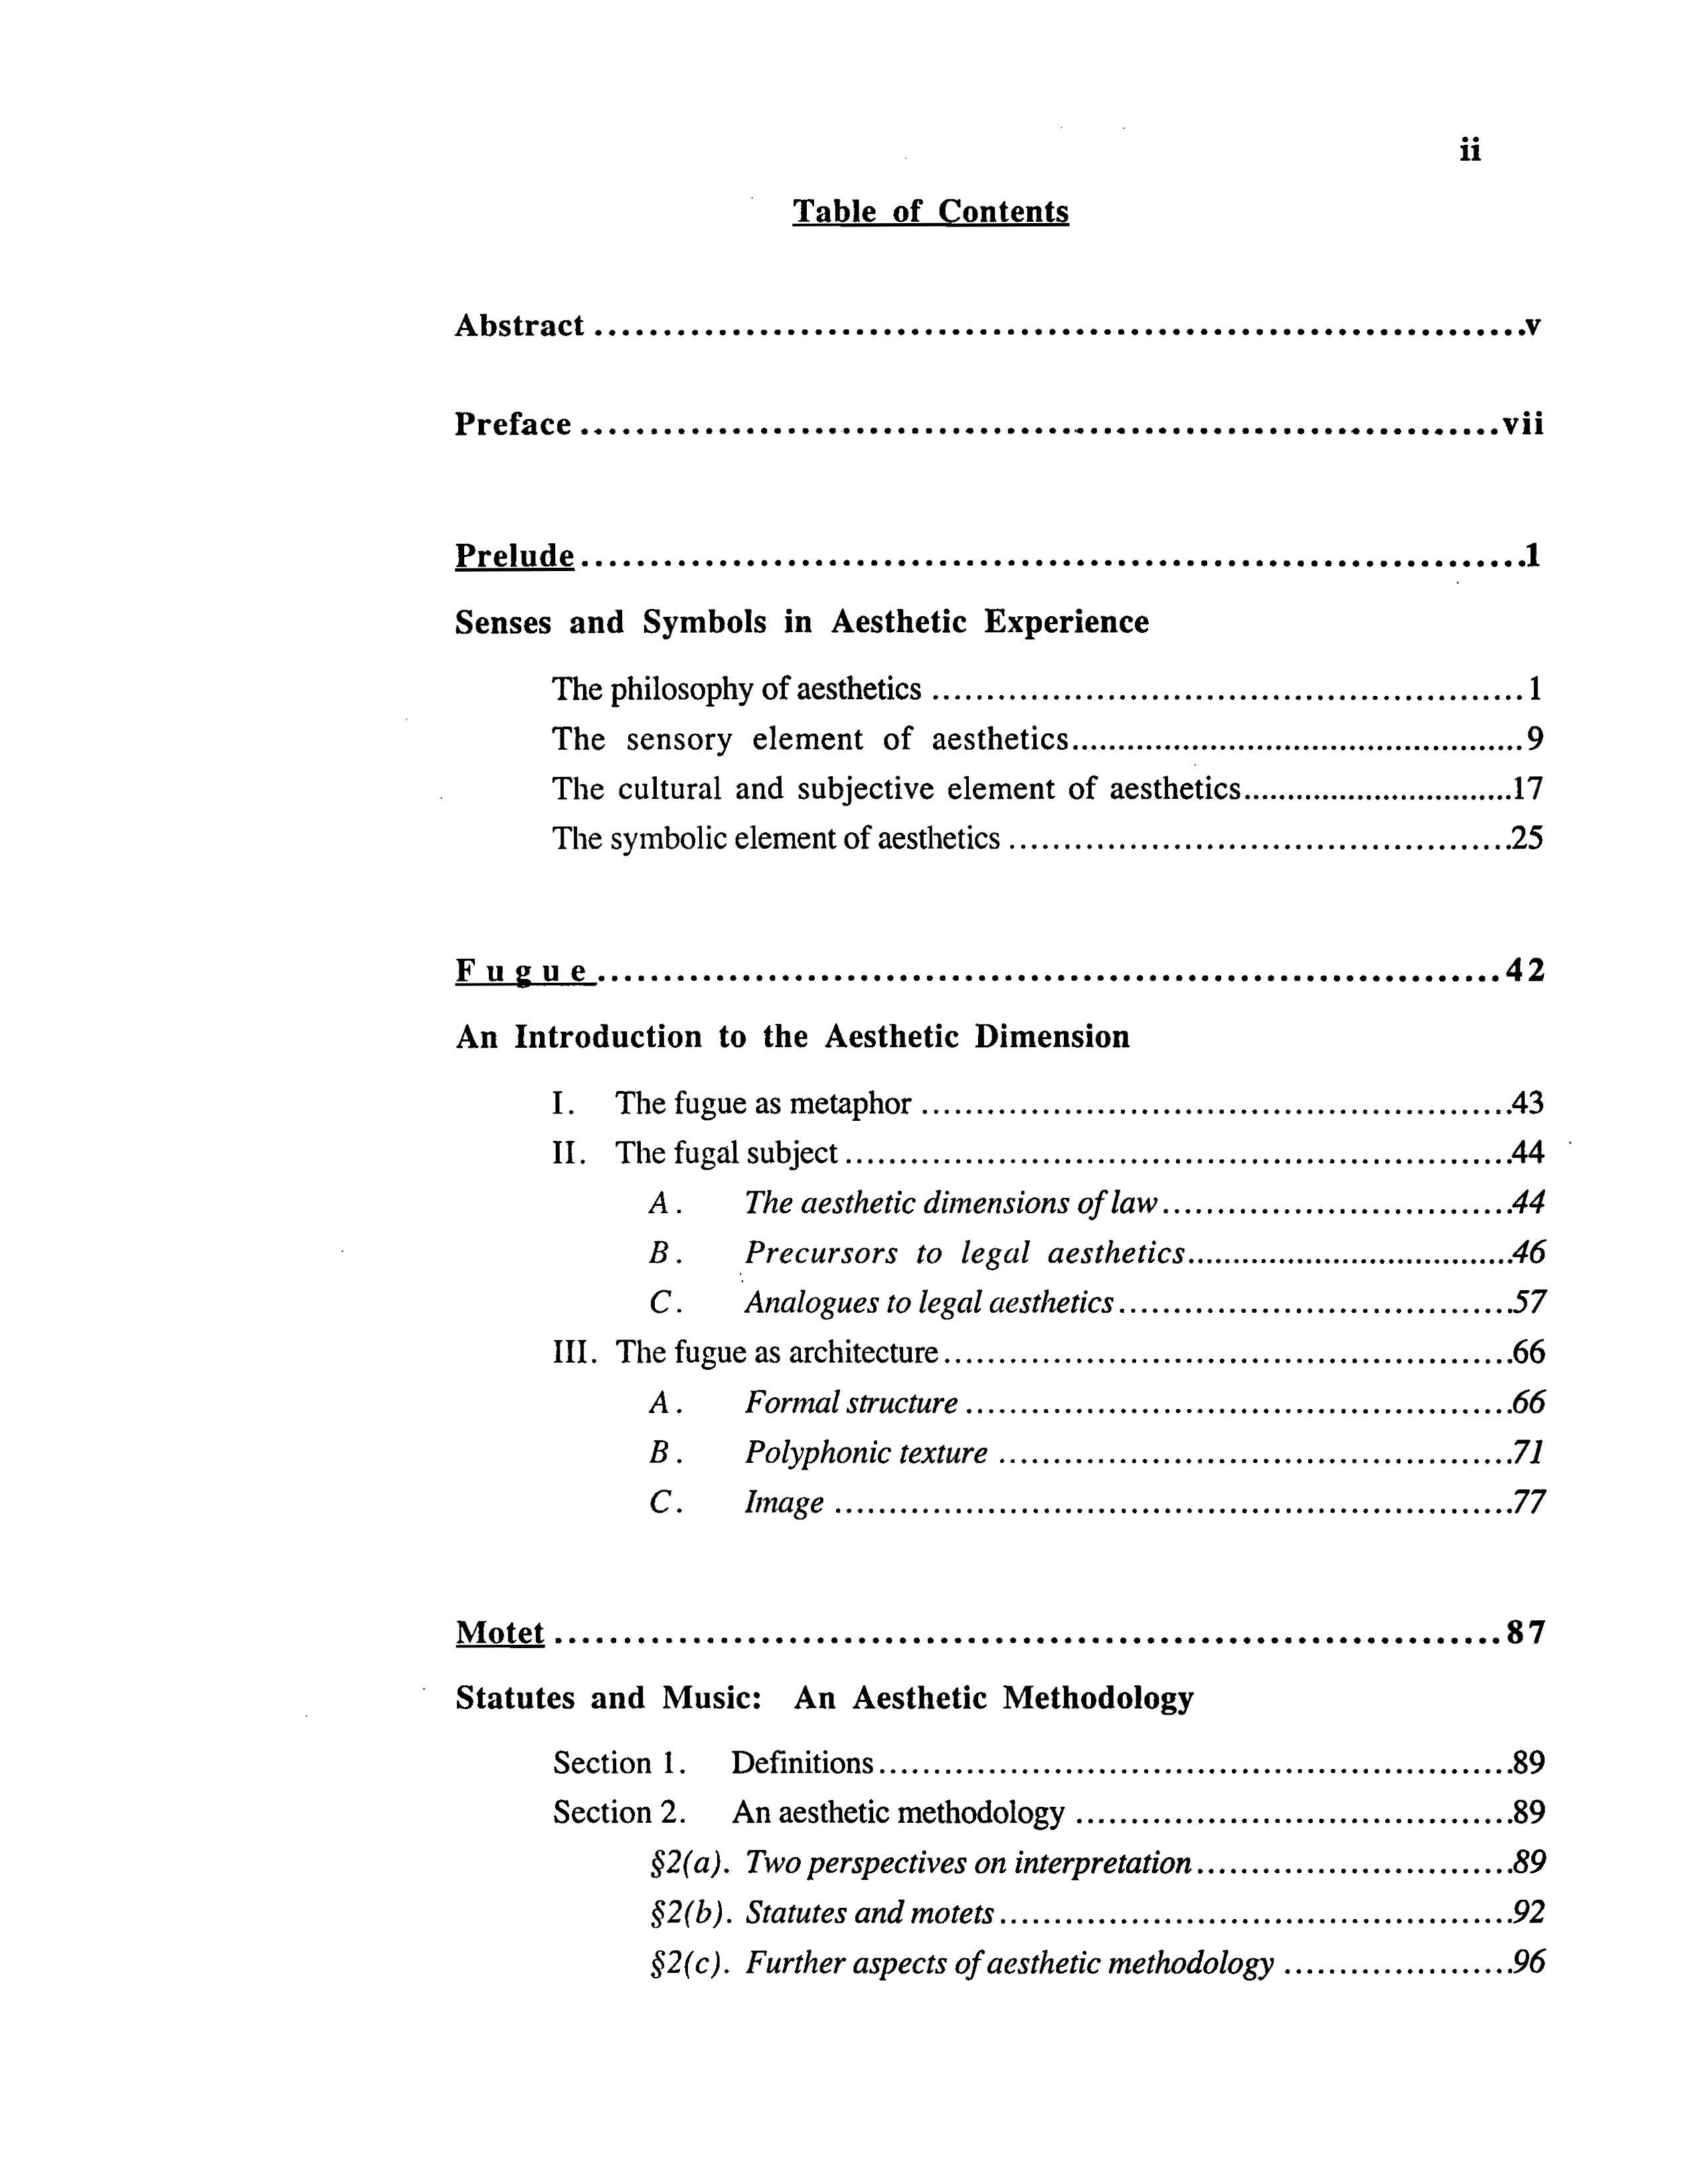 Table of contents. Manderson, D. (1996). Songs without music: Aesthetic dimensions of law and justice.